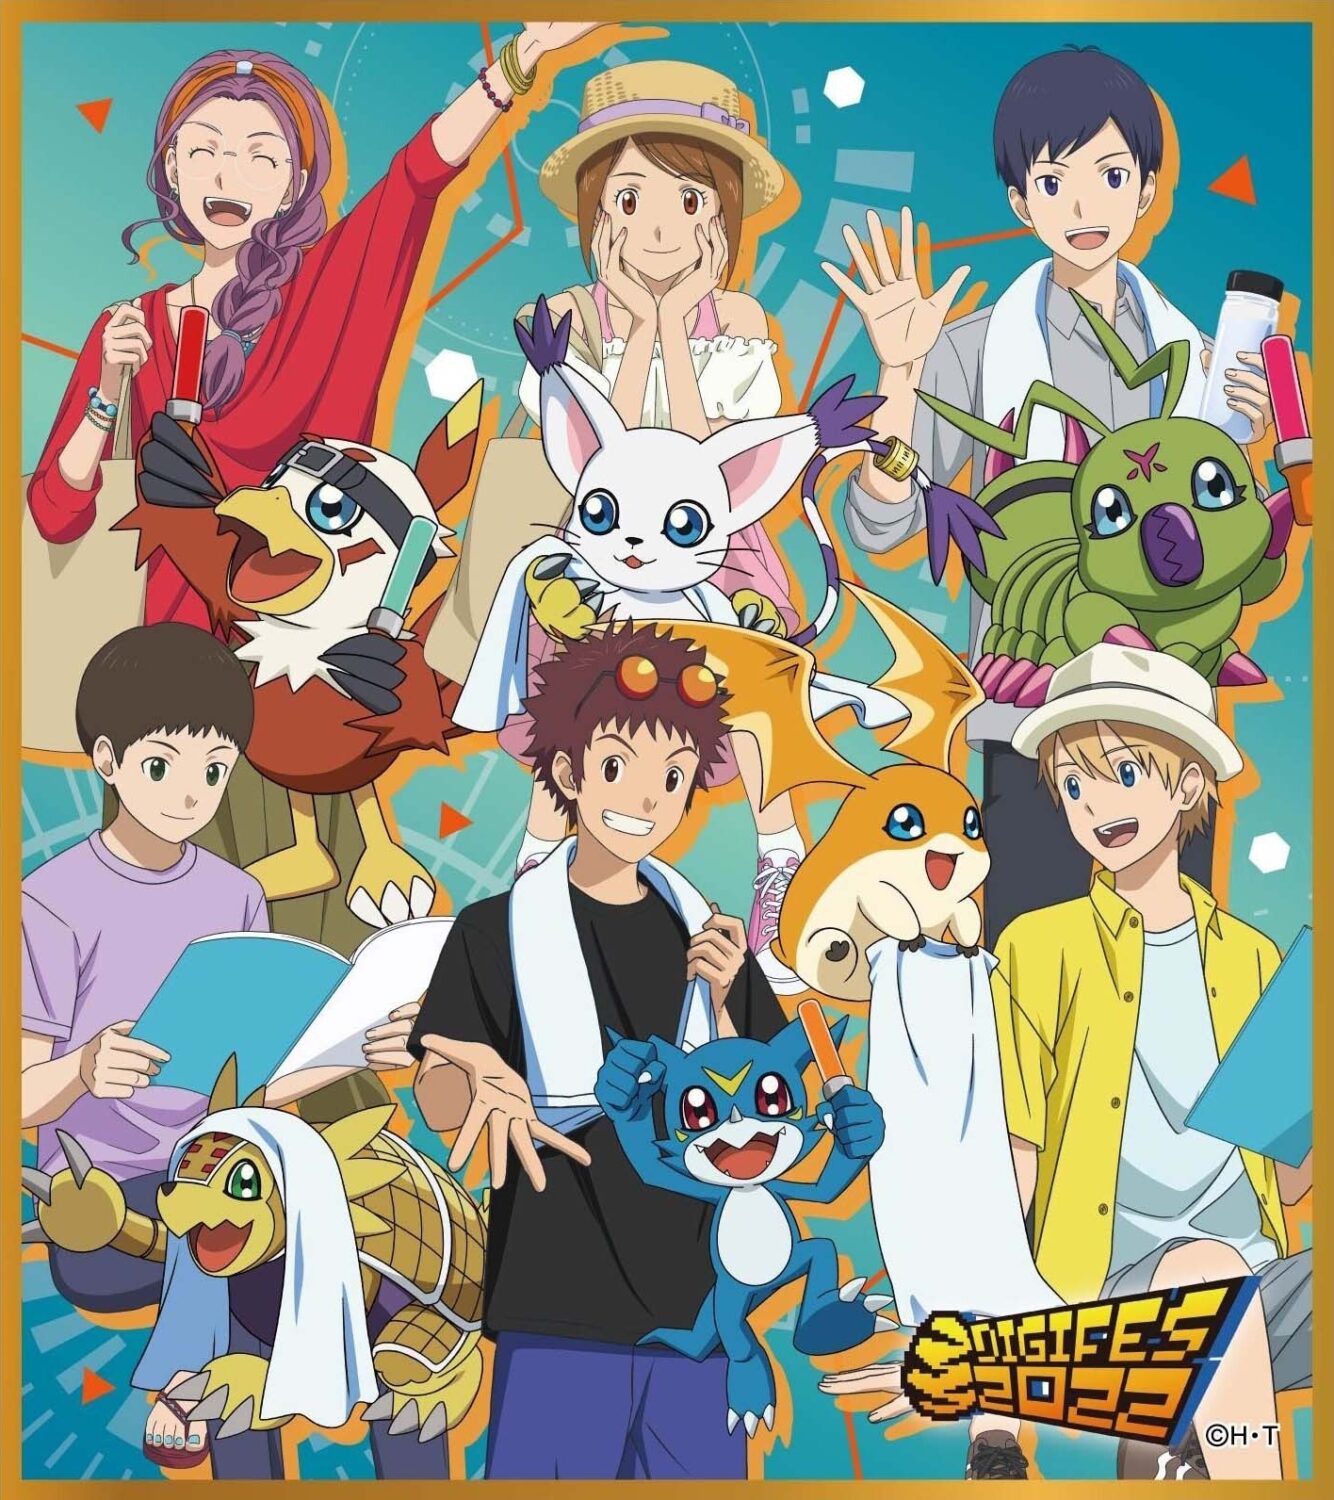 Digimon Adventure 02: The Beginning- New Early Poster, Releases